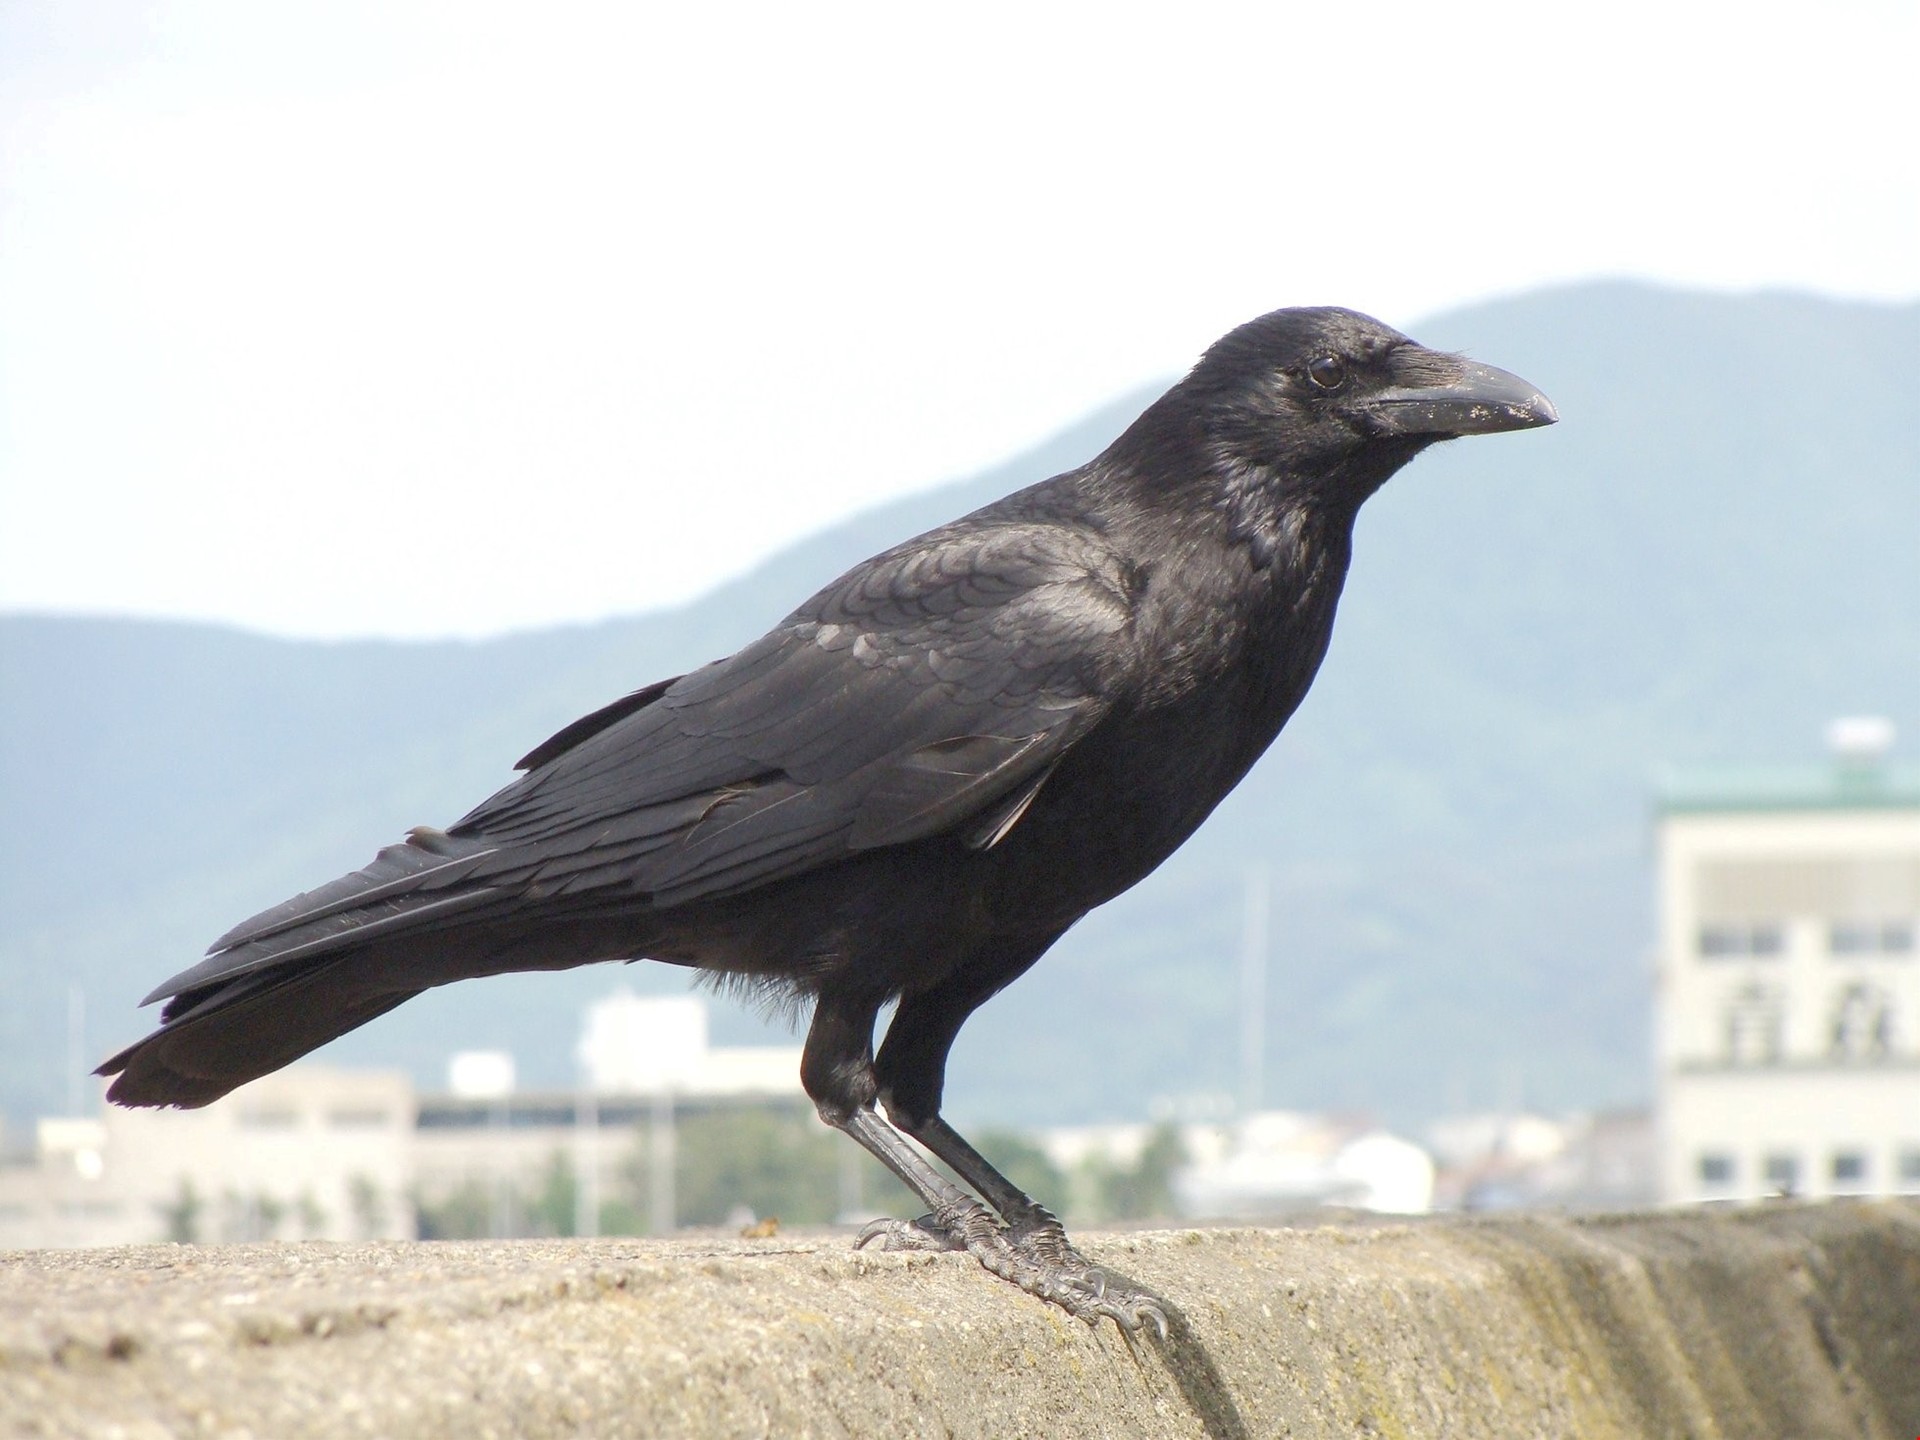 1920x1440, Download 1k Crow Sitting On Wall - Crow Rook Raven - HD Wallpaper 